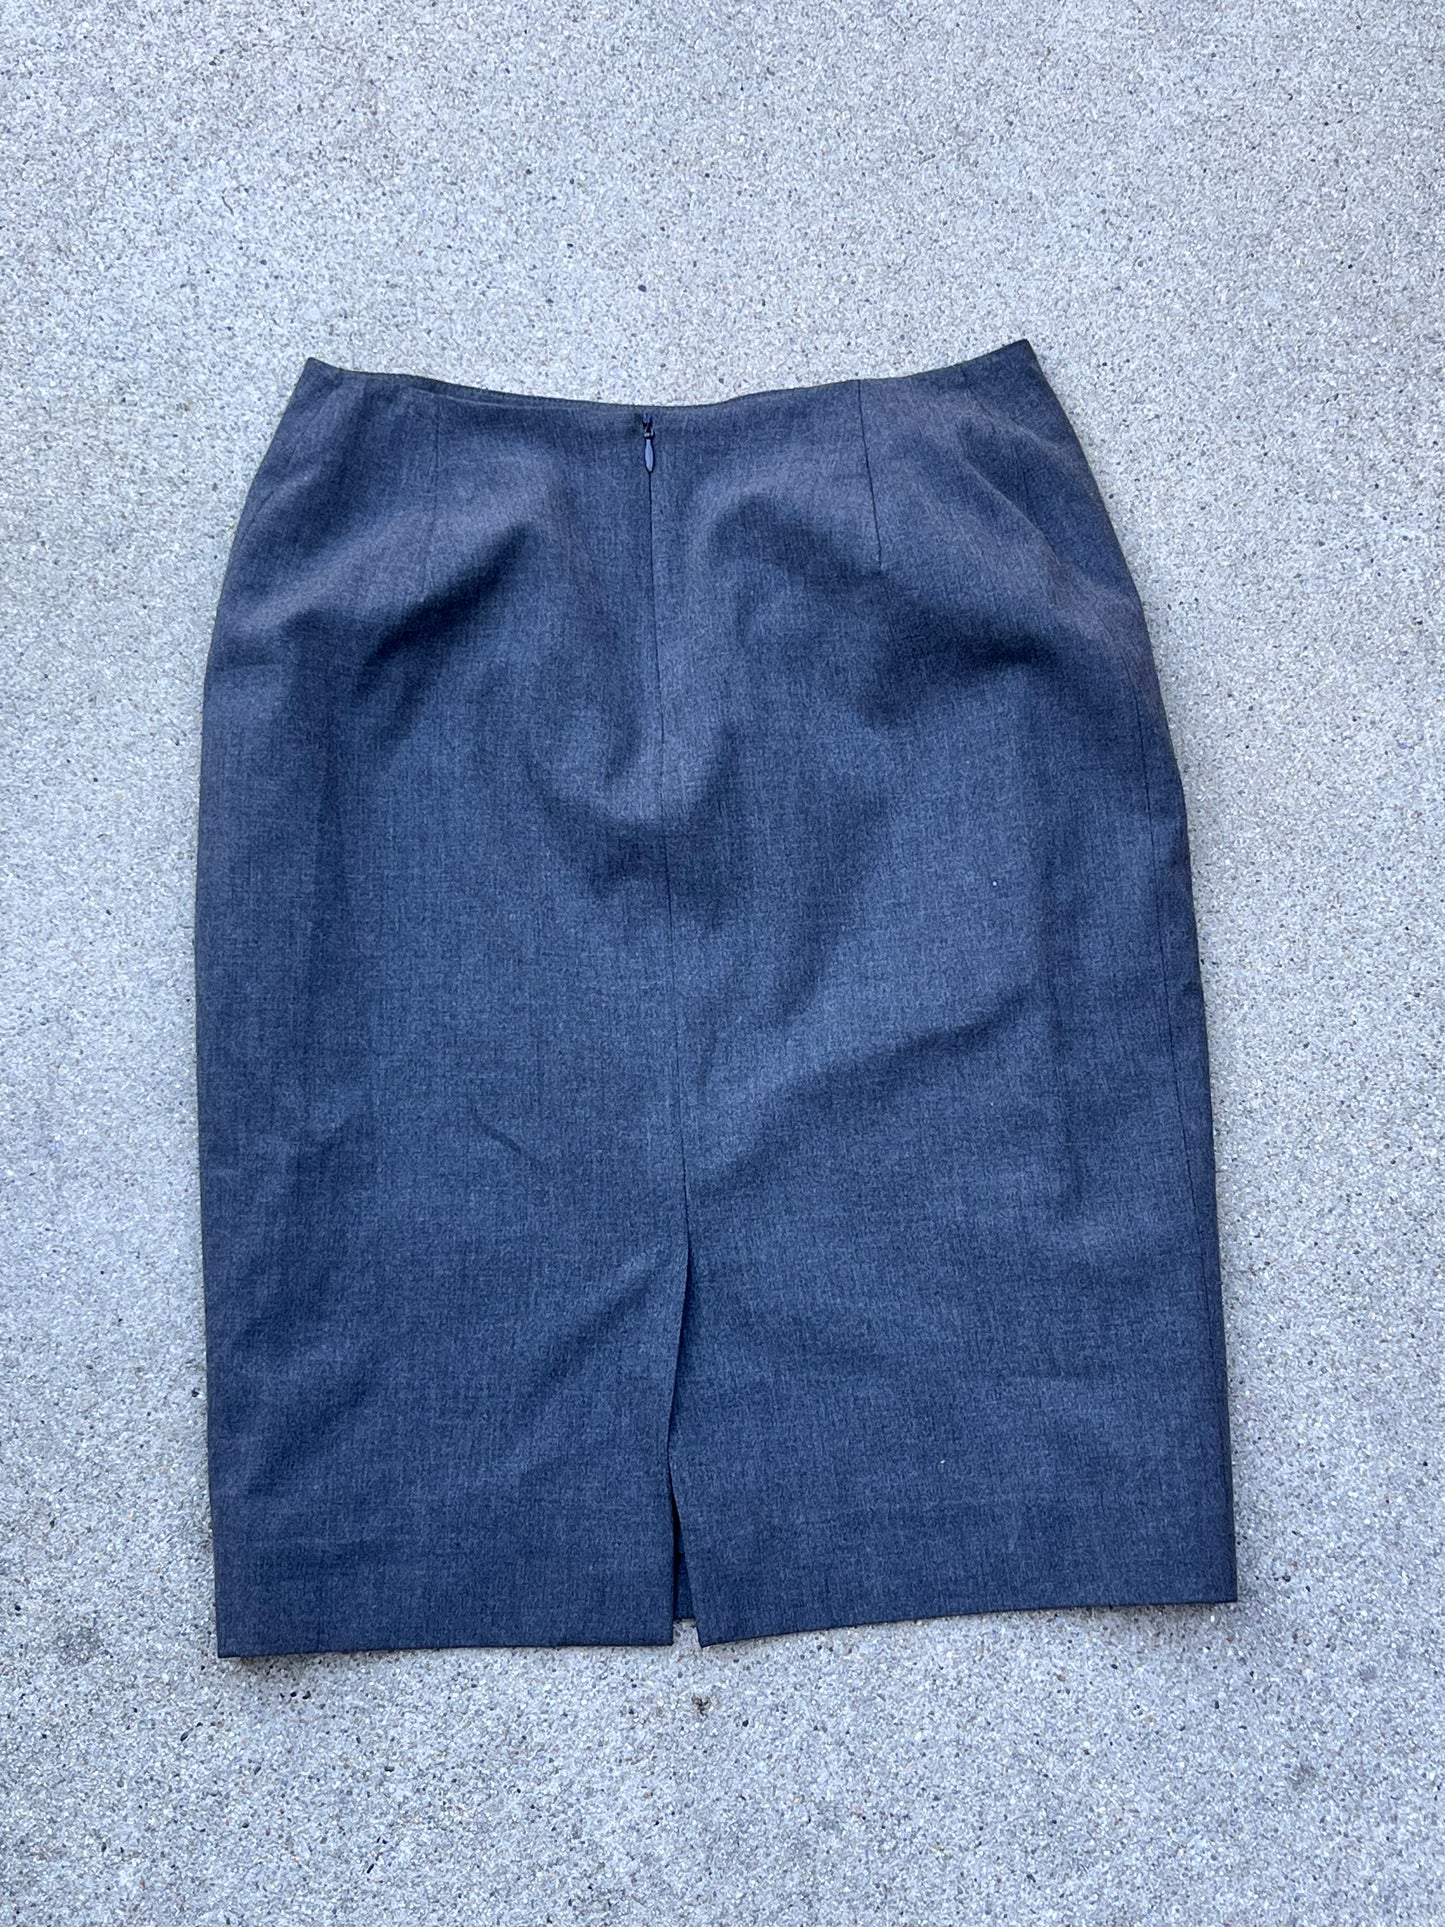 SILICON VALLEY: Monica's Screen Used Skirt (S)